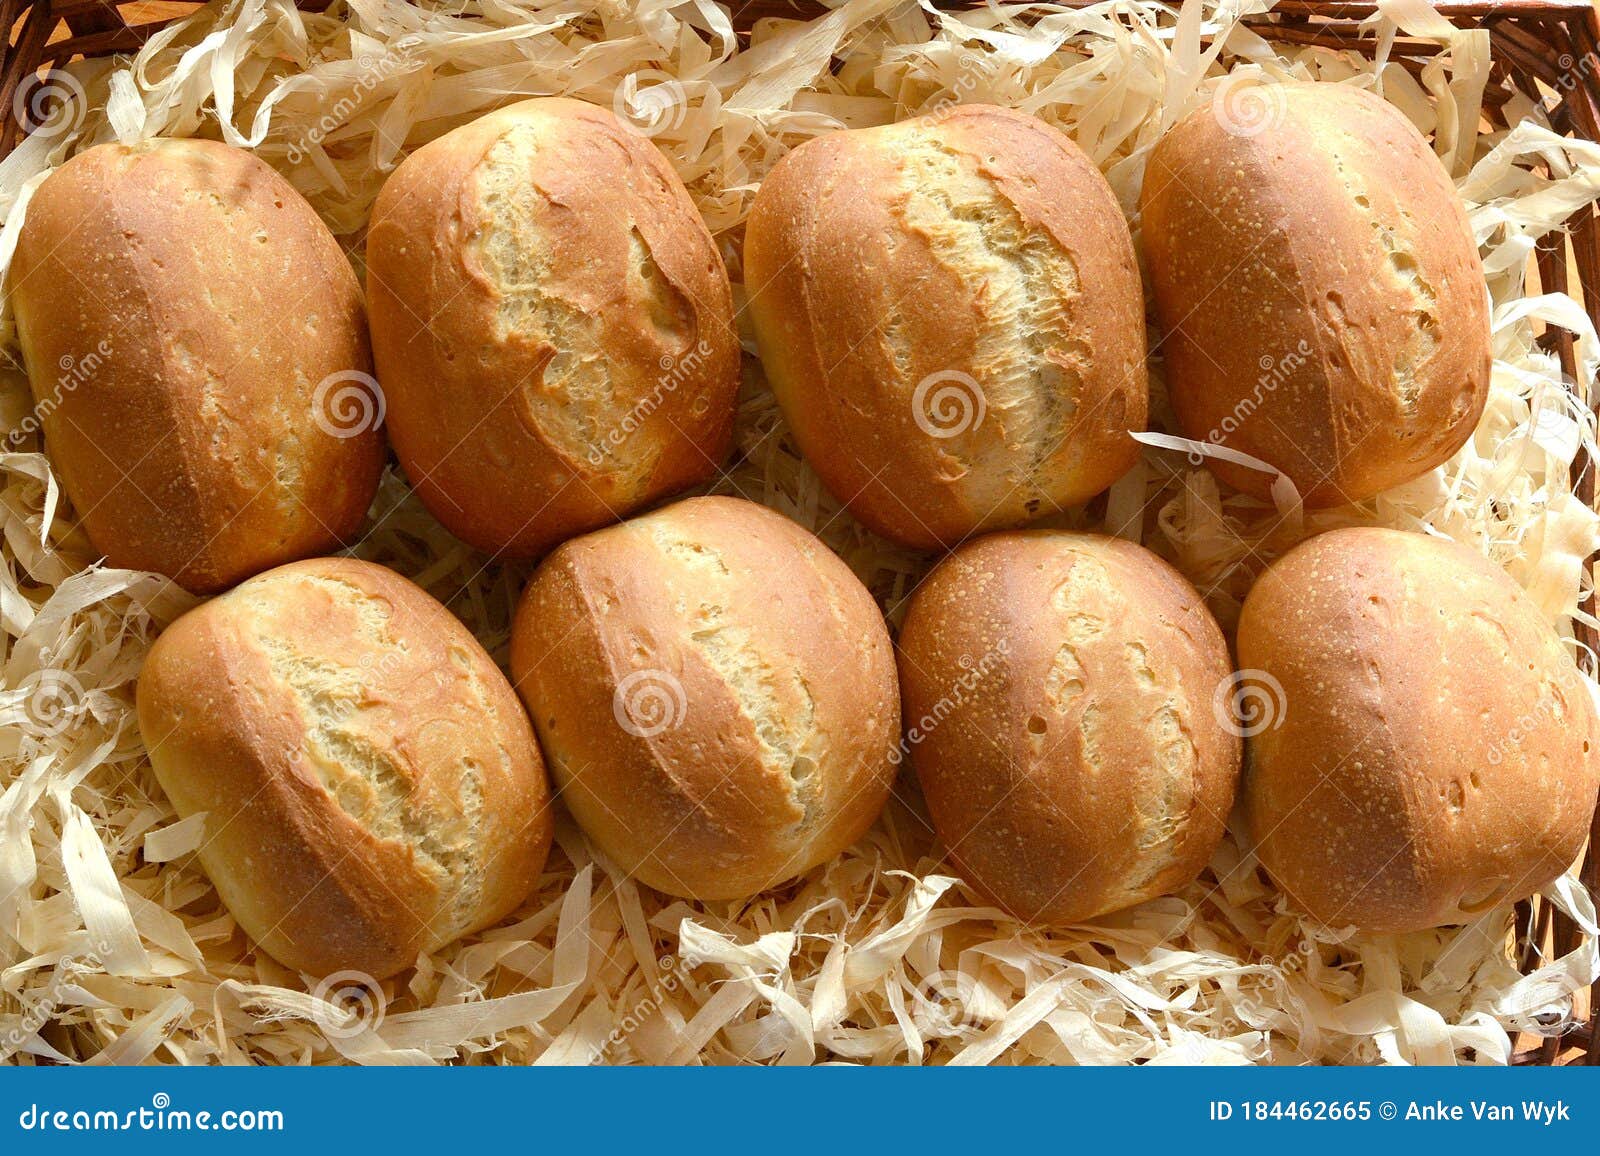 German Bread Buns - Broetchen Stock Image - Image of morning, common ...